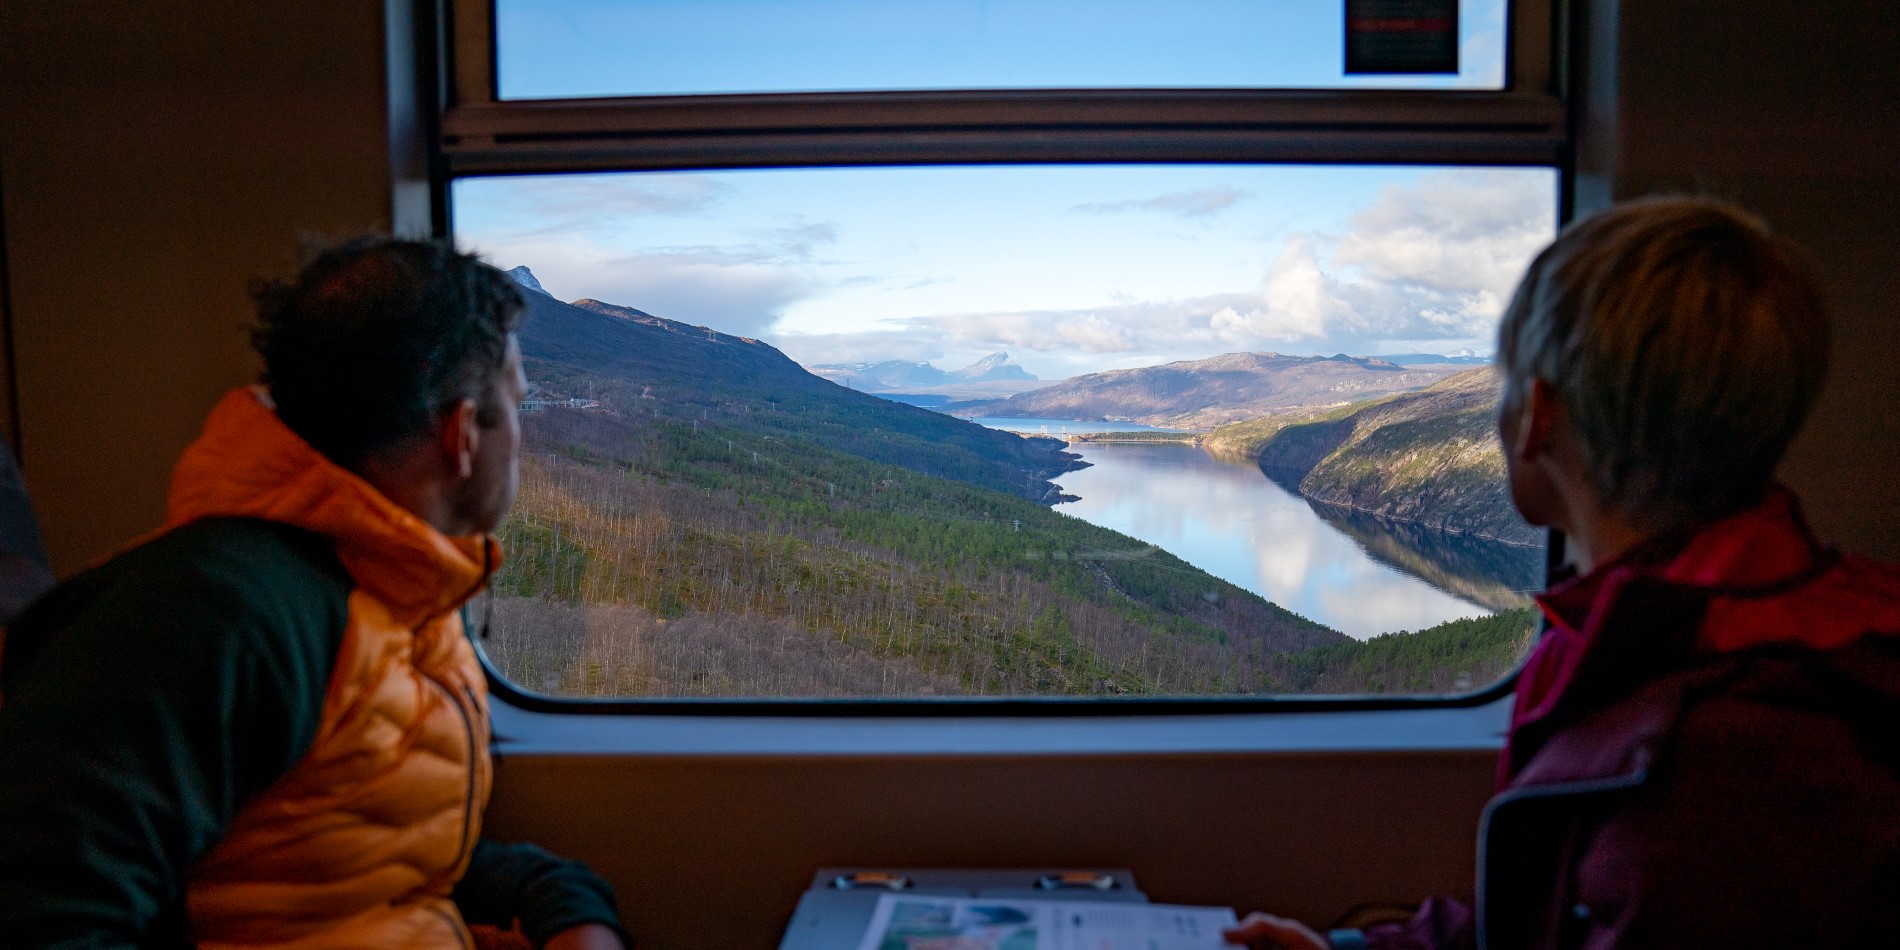 A couple looking out of the window of the Arctic Train - down on a lake